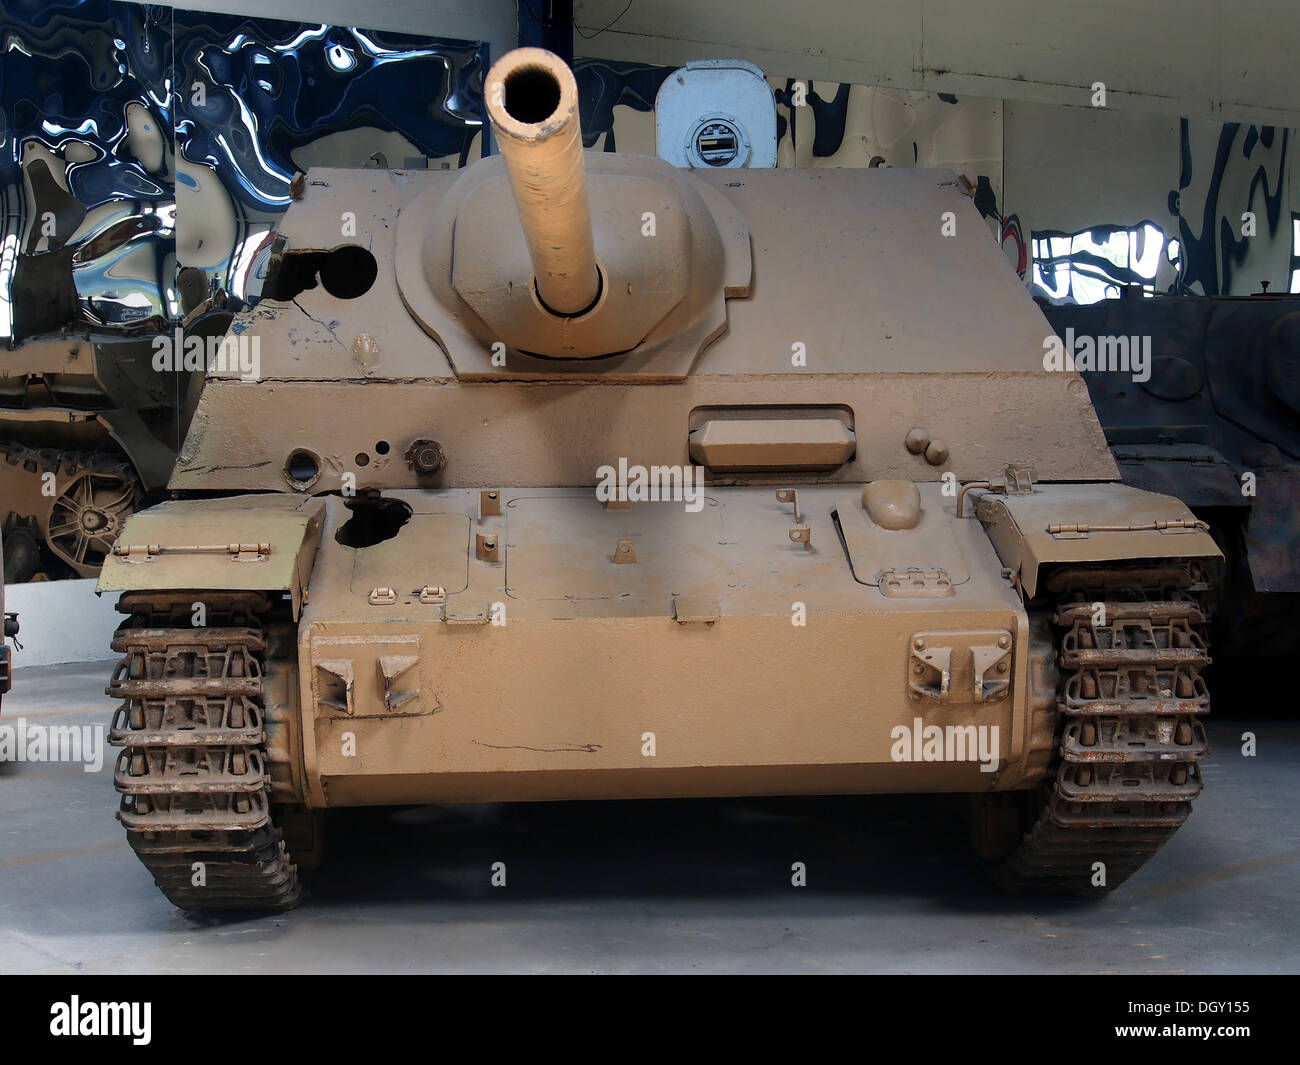 Sd.Kfz. 162-1 Jagdpanzer IV-70(A) in the tank museum, Saumur, France, pic-3 Sd.Kfz. 162/1 Jagdpanzer IV/70(A) Stock Photo